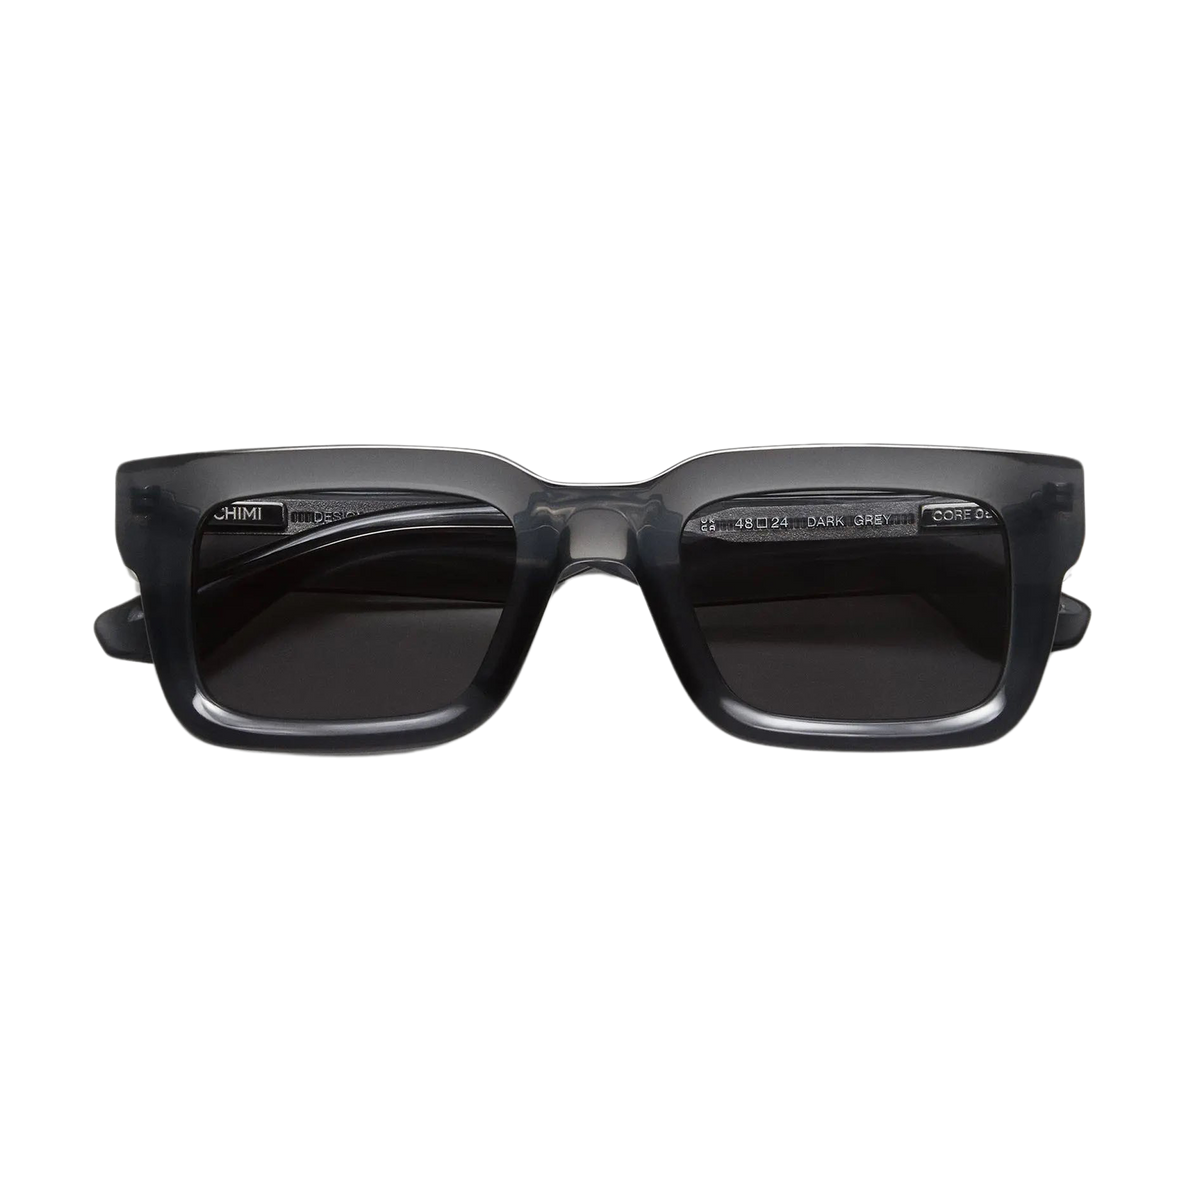 Chimi Model 05 Dark Grey Gradient Lenses Sunglasses 48mm with square frames, featuring gradient black CR-39 lenses on a white background.